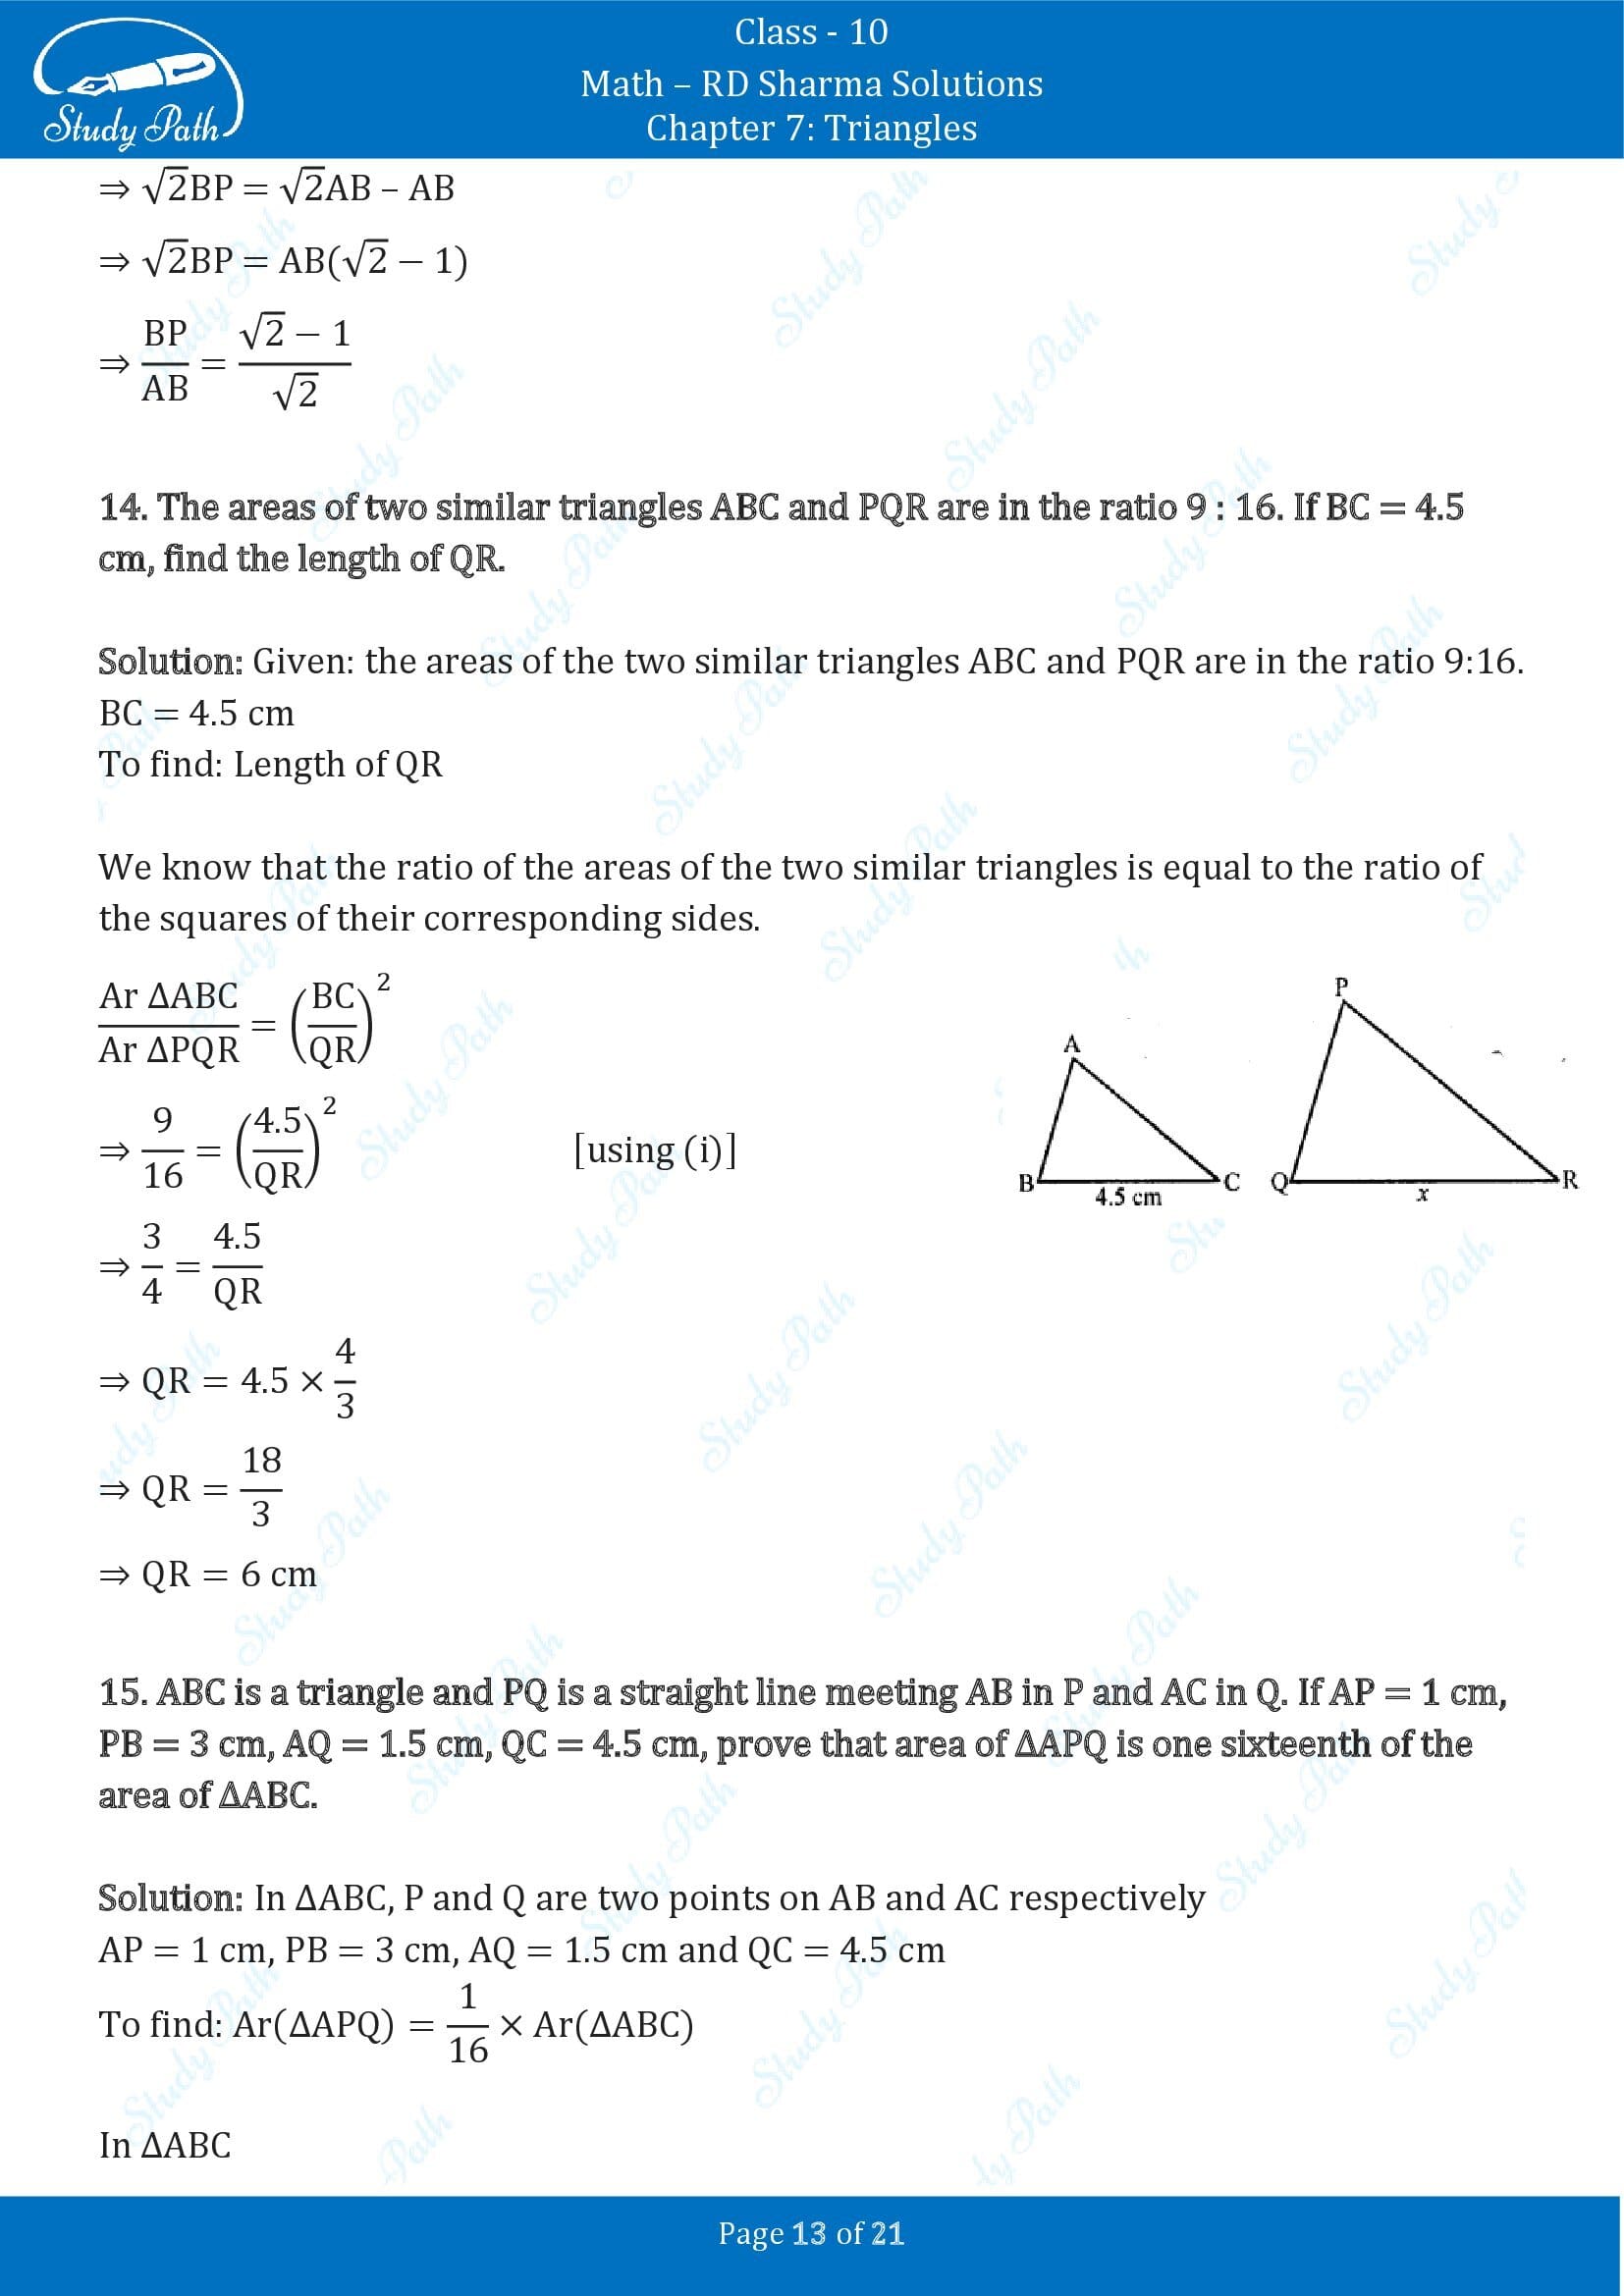 RD Sharma Solutions Class 10 Chapter 7 Triangles Exercise 7.6 00013